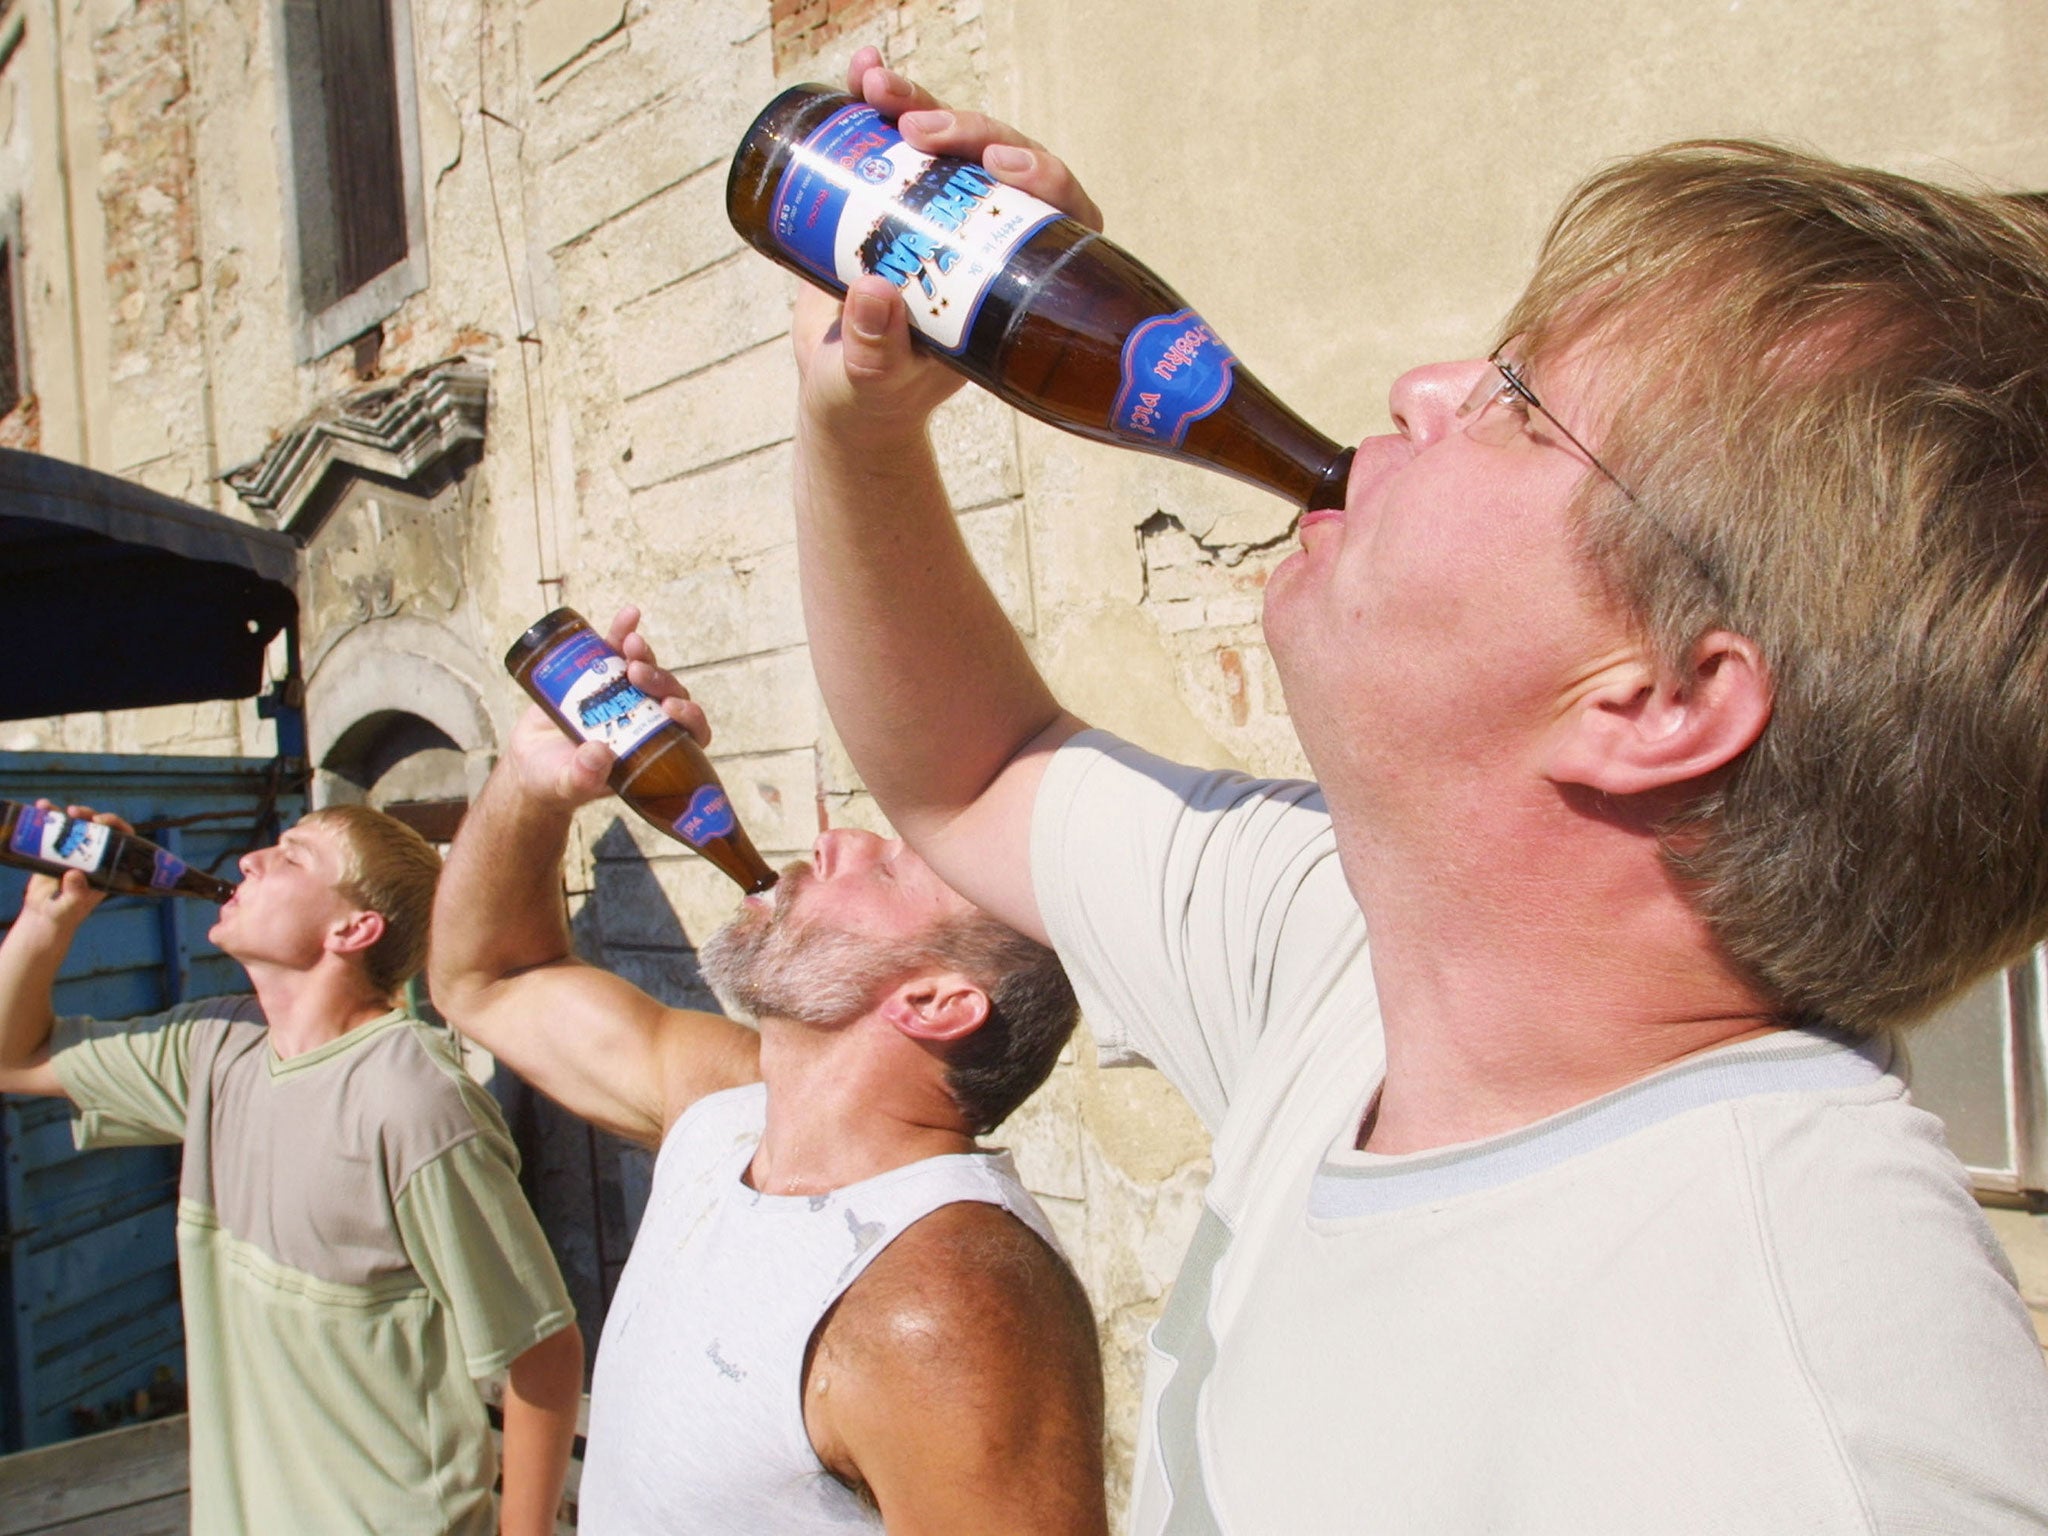 The Czech Republic has been found to drink the most beer per person in the world